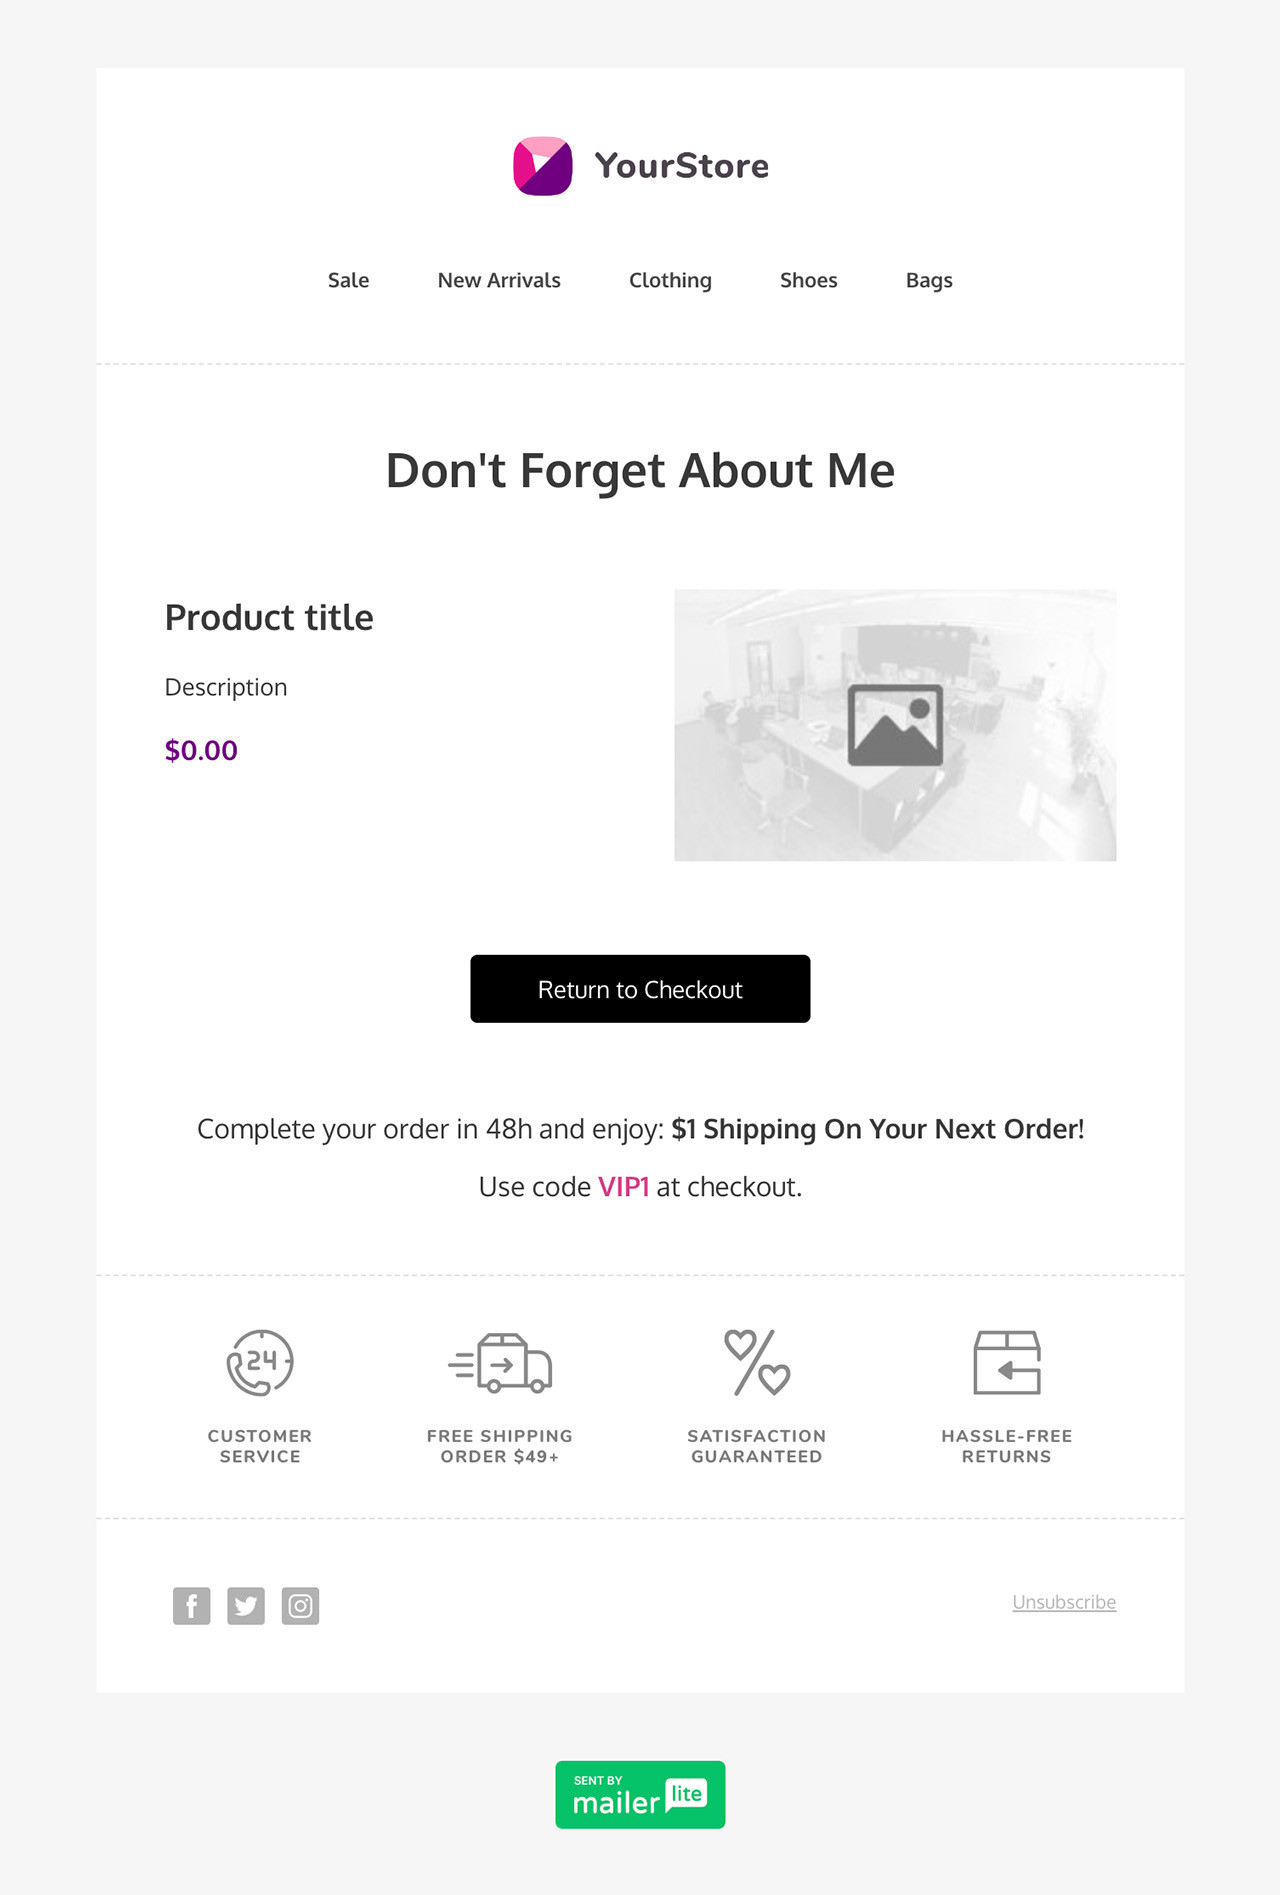 Single product abandoned cart template - Made by MailerLite